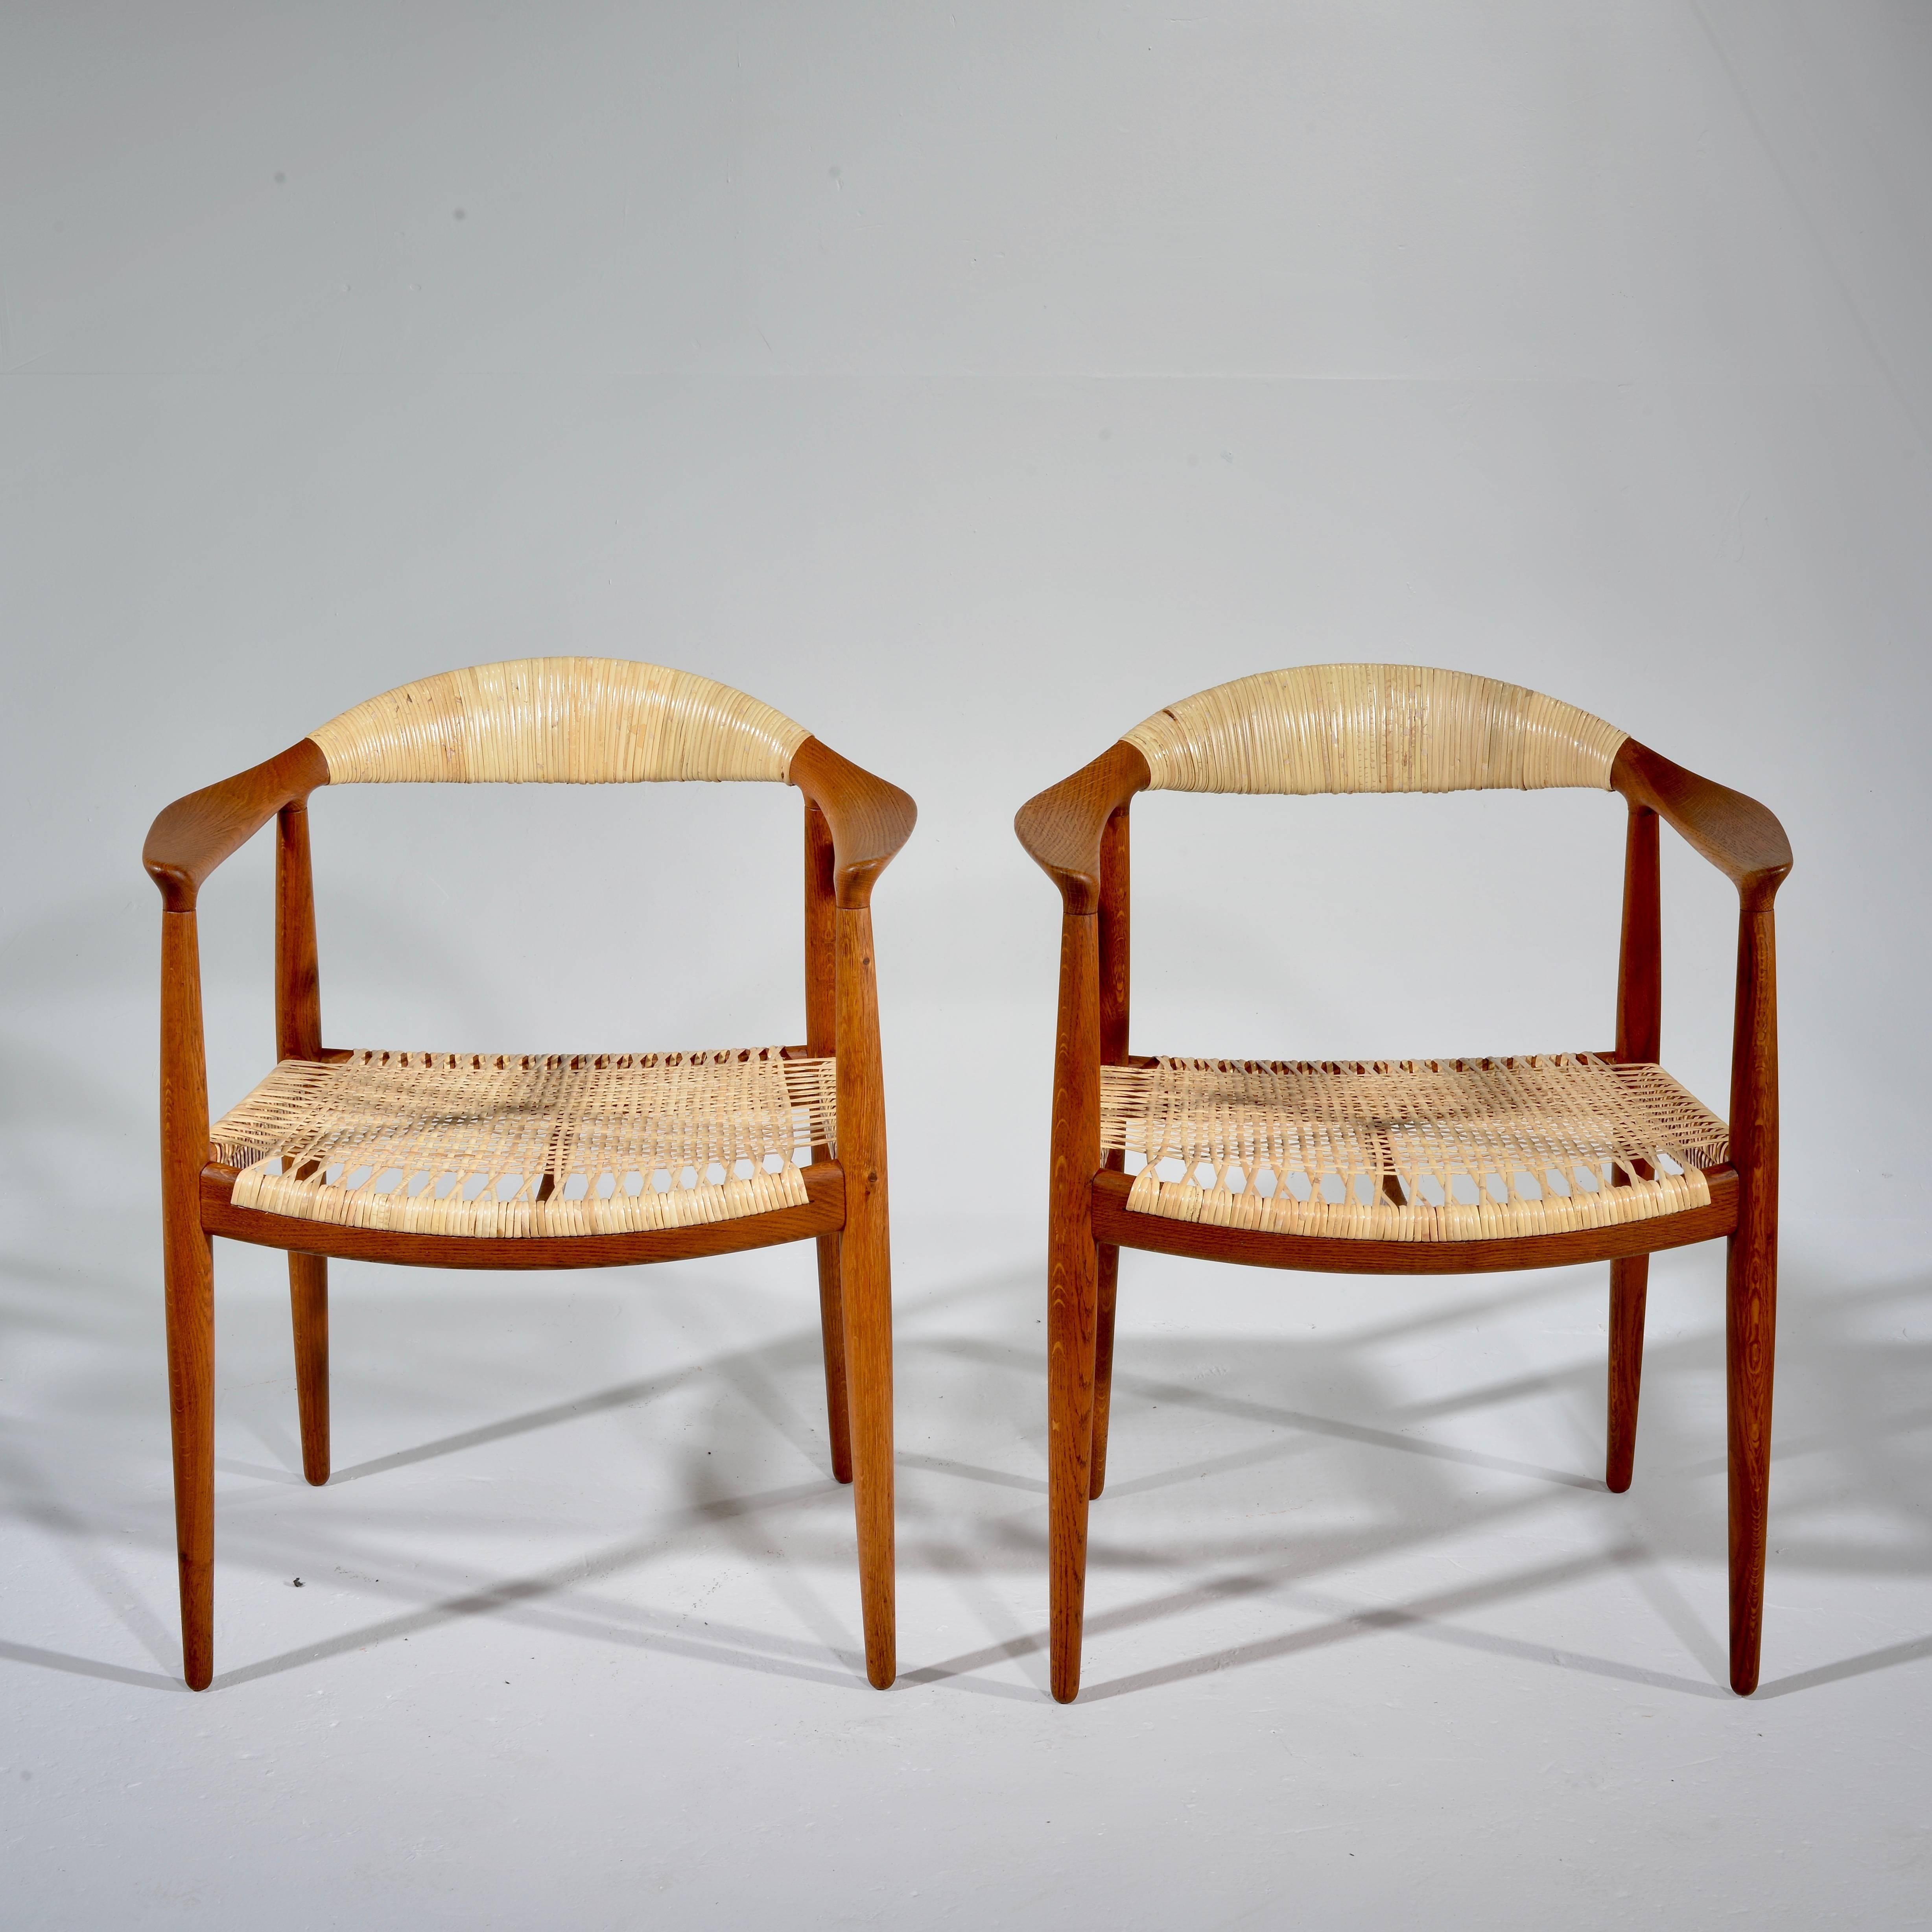 This is a pair of early oak and caned armchair by Hans Wegner for Johannes Hansen, Denmark. Excellent condition including new professionally crafted cane seats and backs.